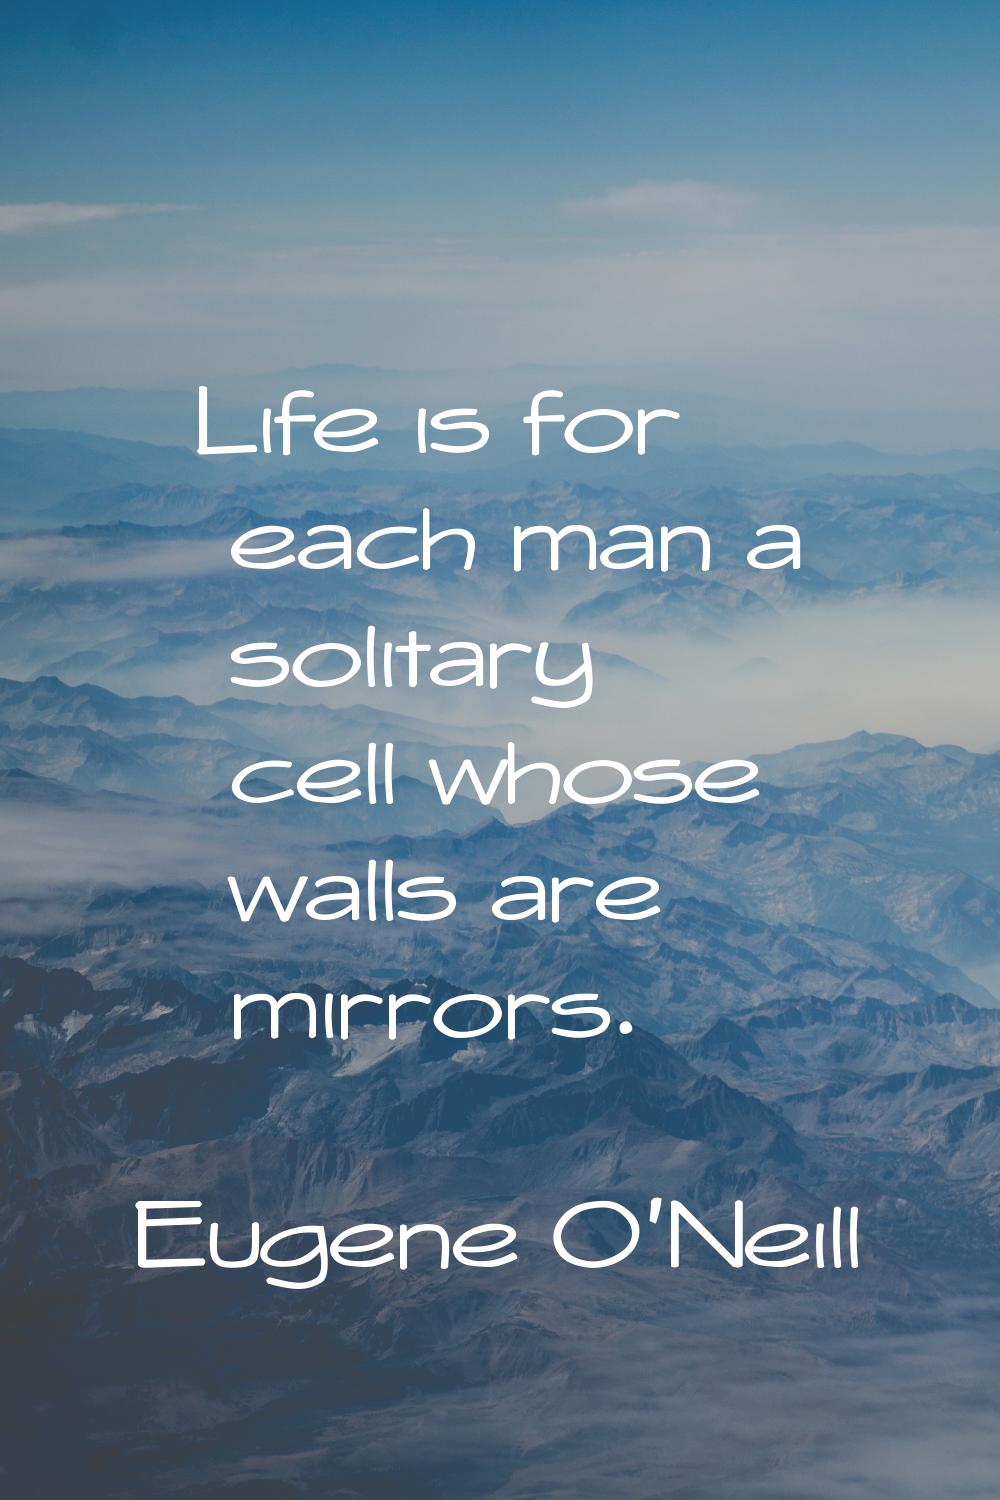 Life is for each man a solitary cell whose walls are mirrors.